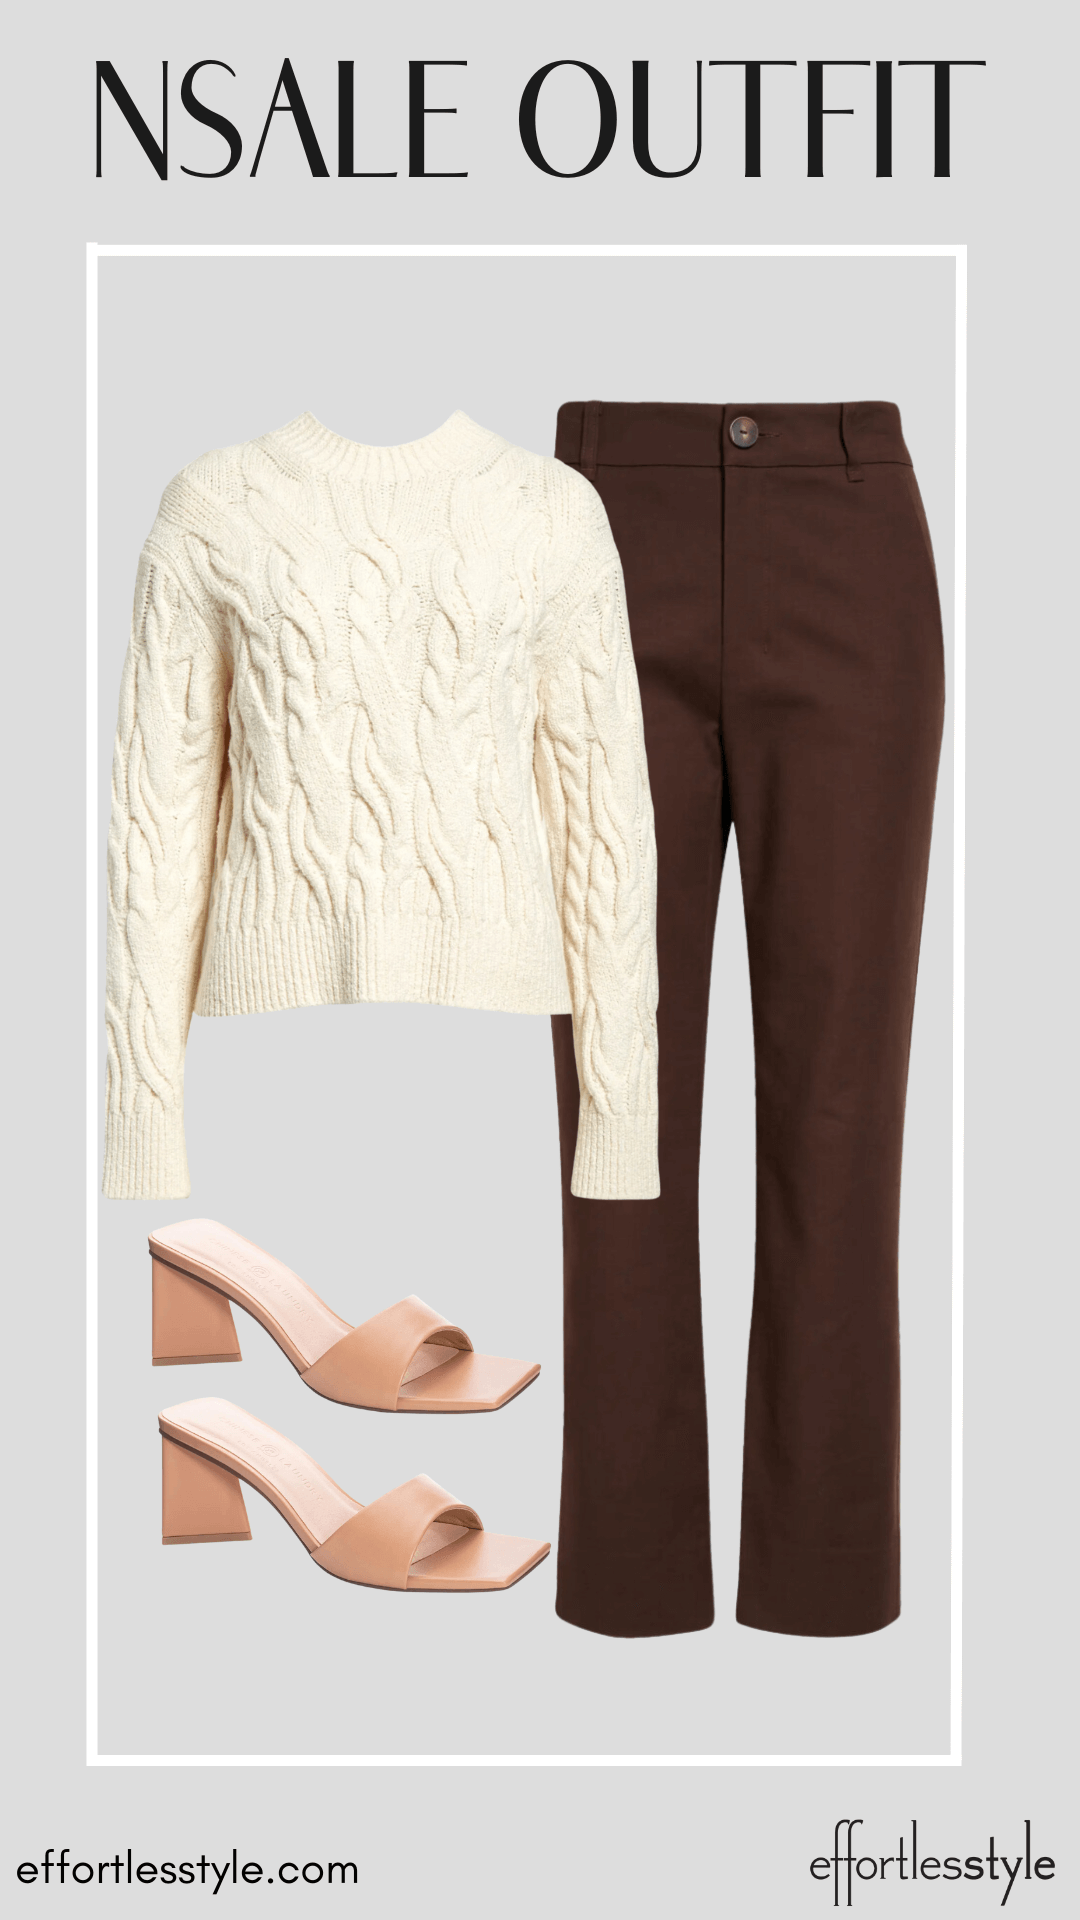 Crewneck Cable Sweater & Brown Pants how to style a sweater and slacks for work classic workwear looks how to wear sandals to the office